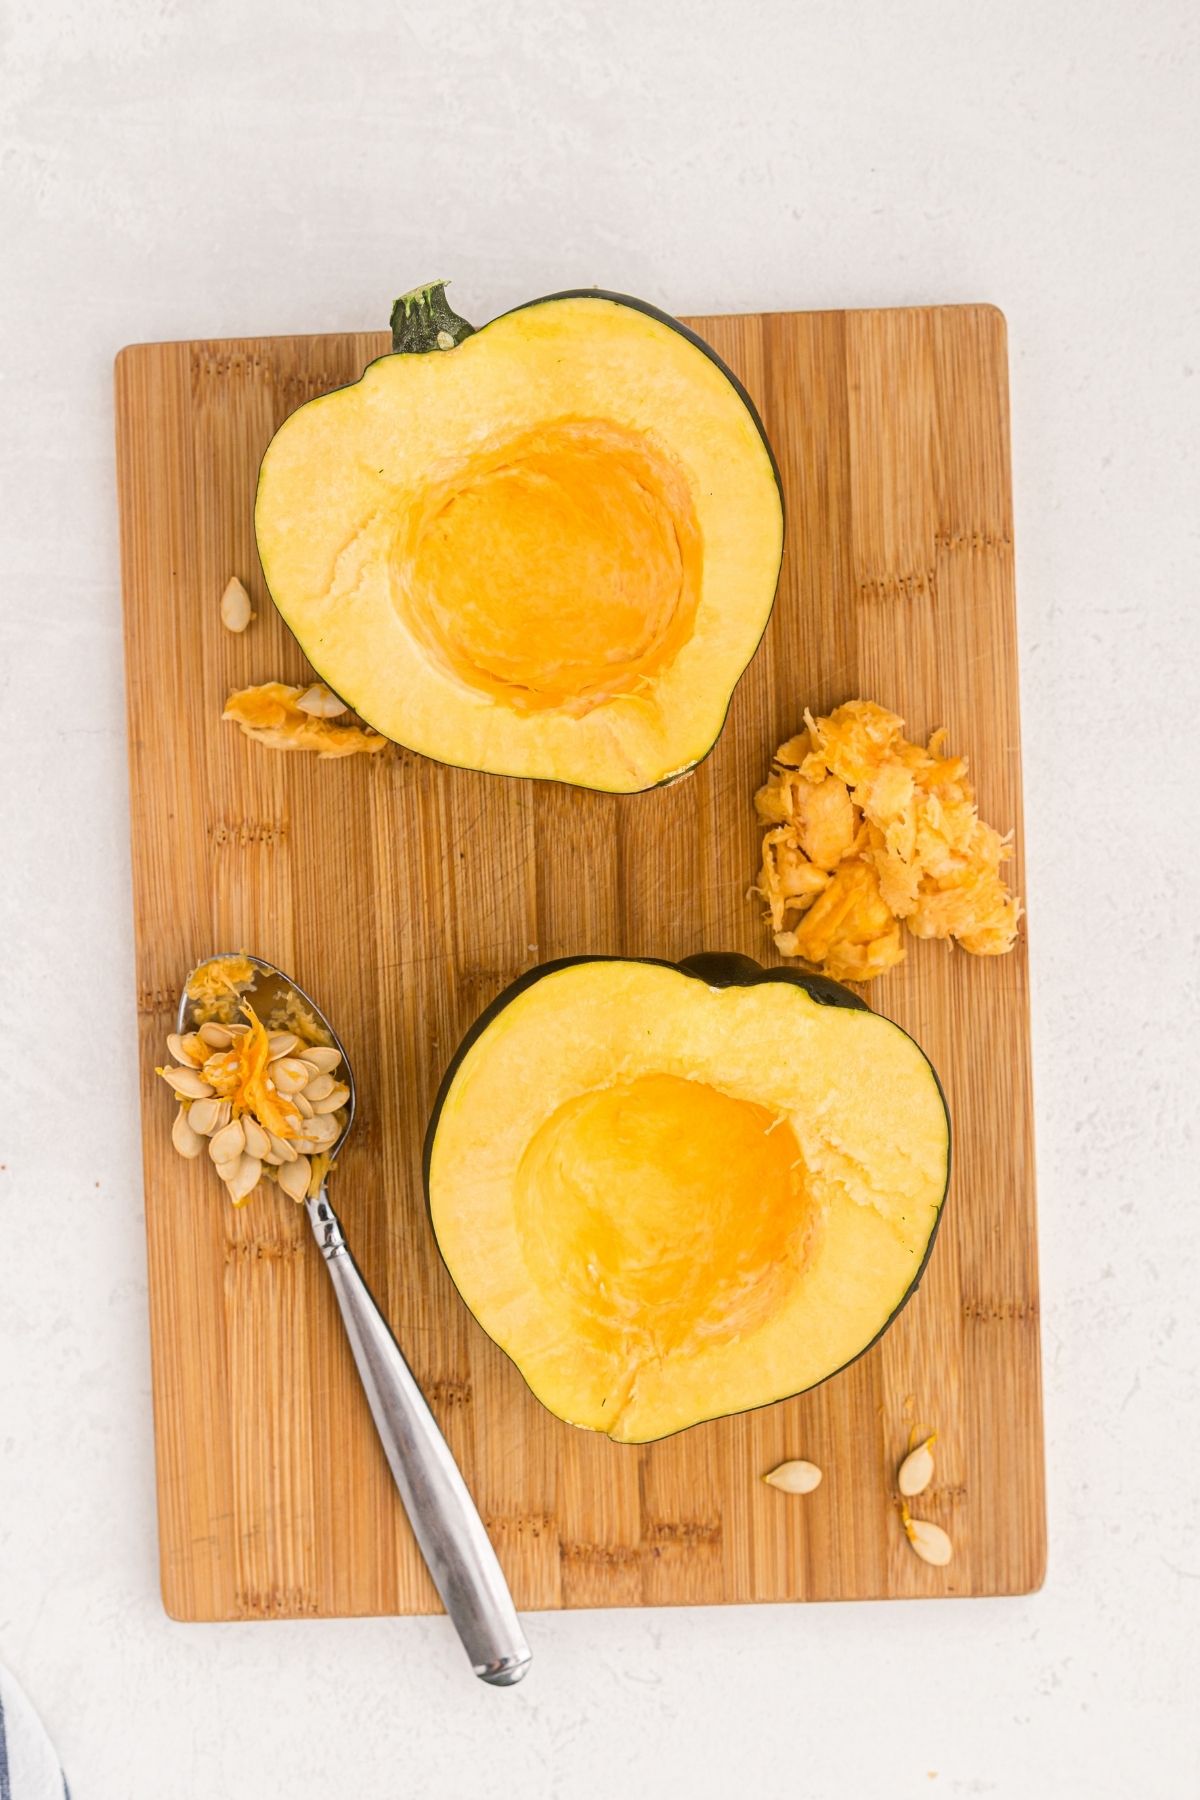 Acorn squash cut in half with a spoon scooping out seeds on a wooden cutting board